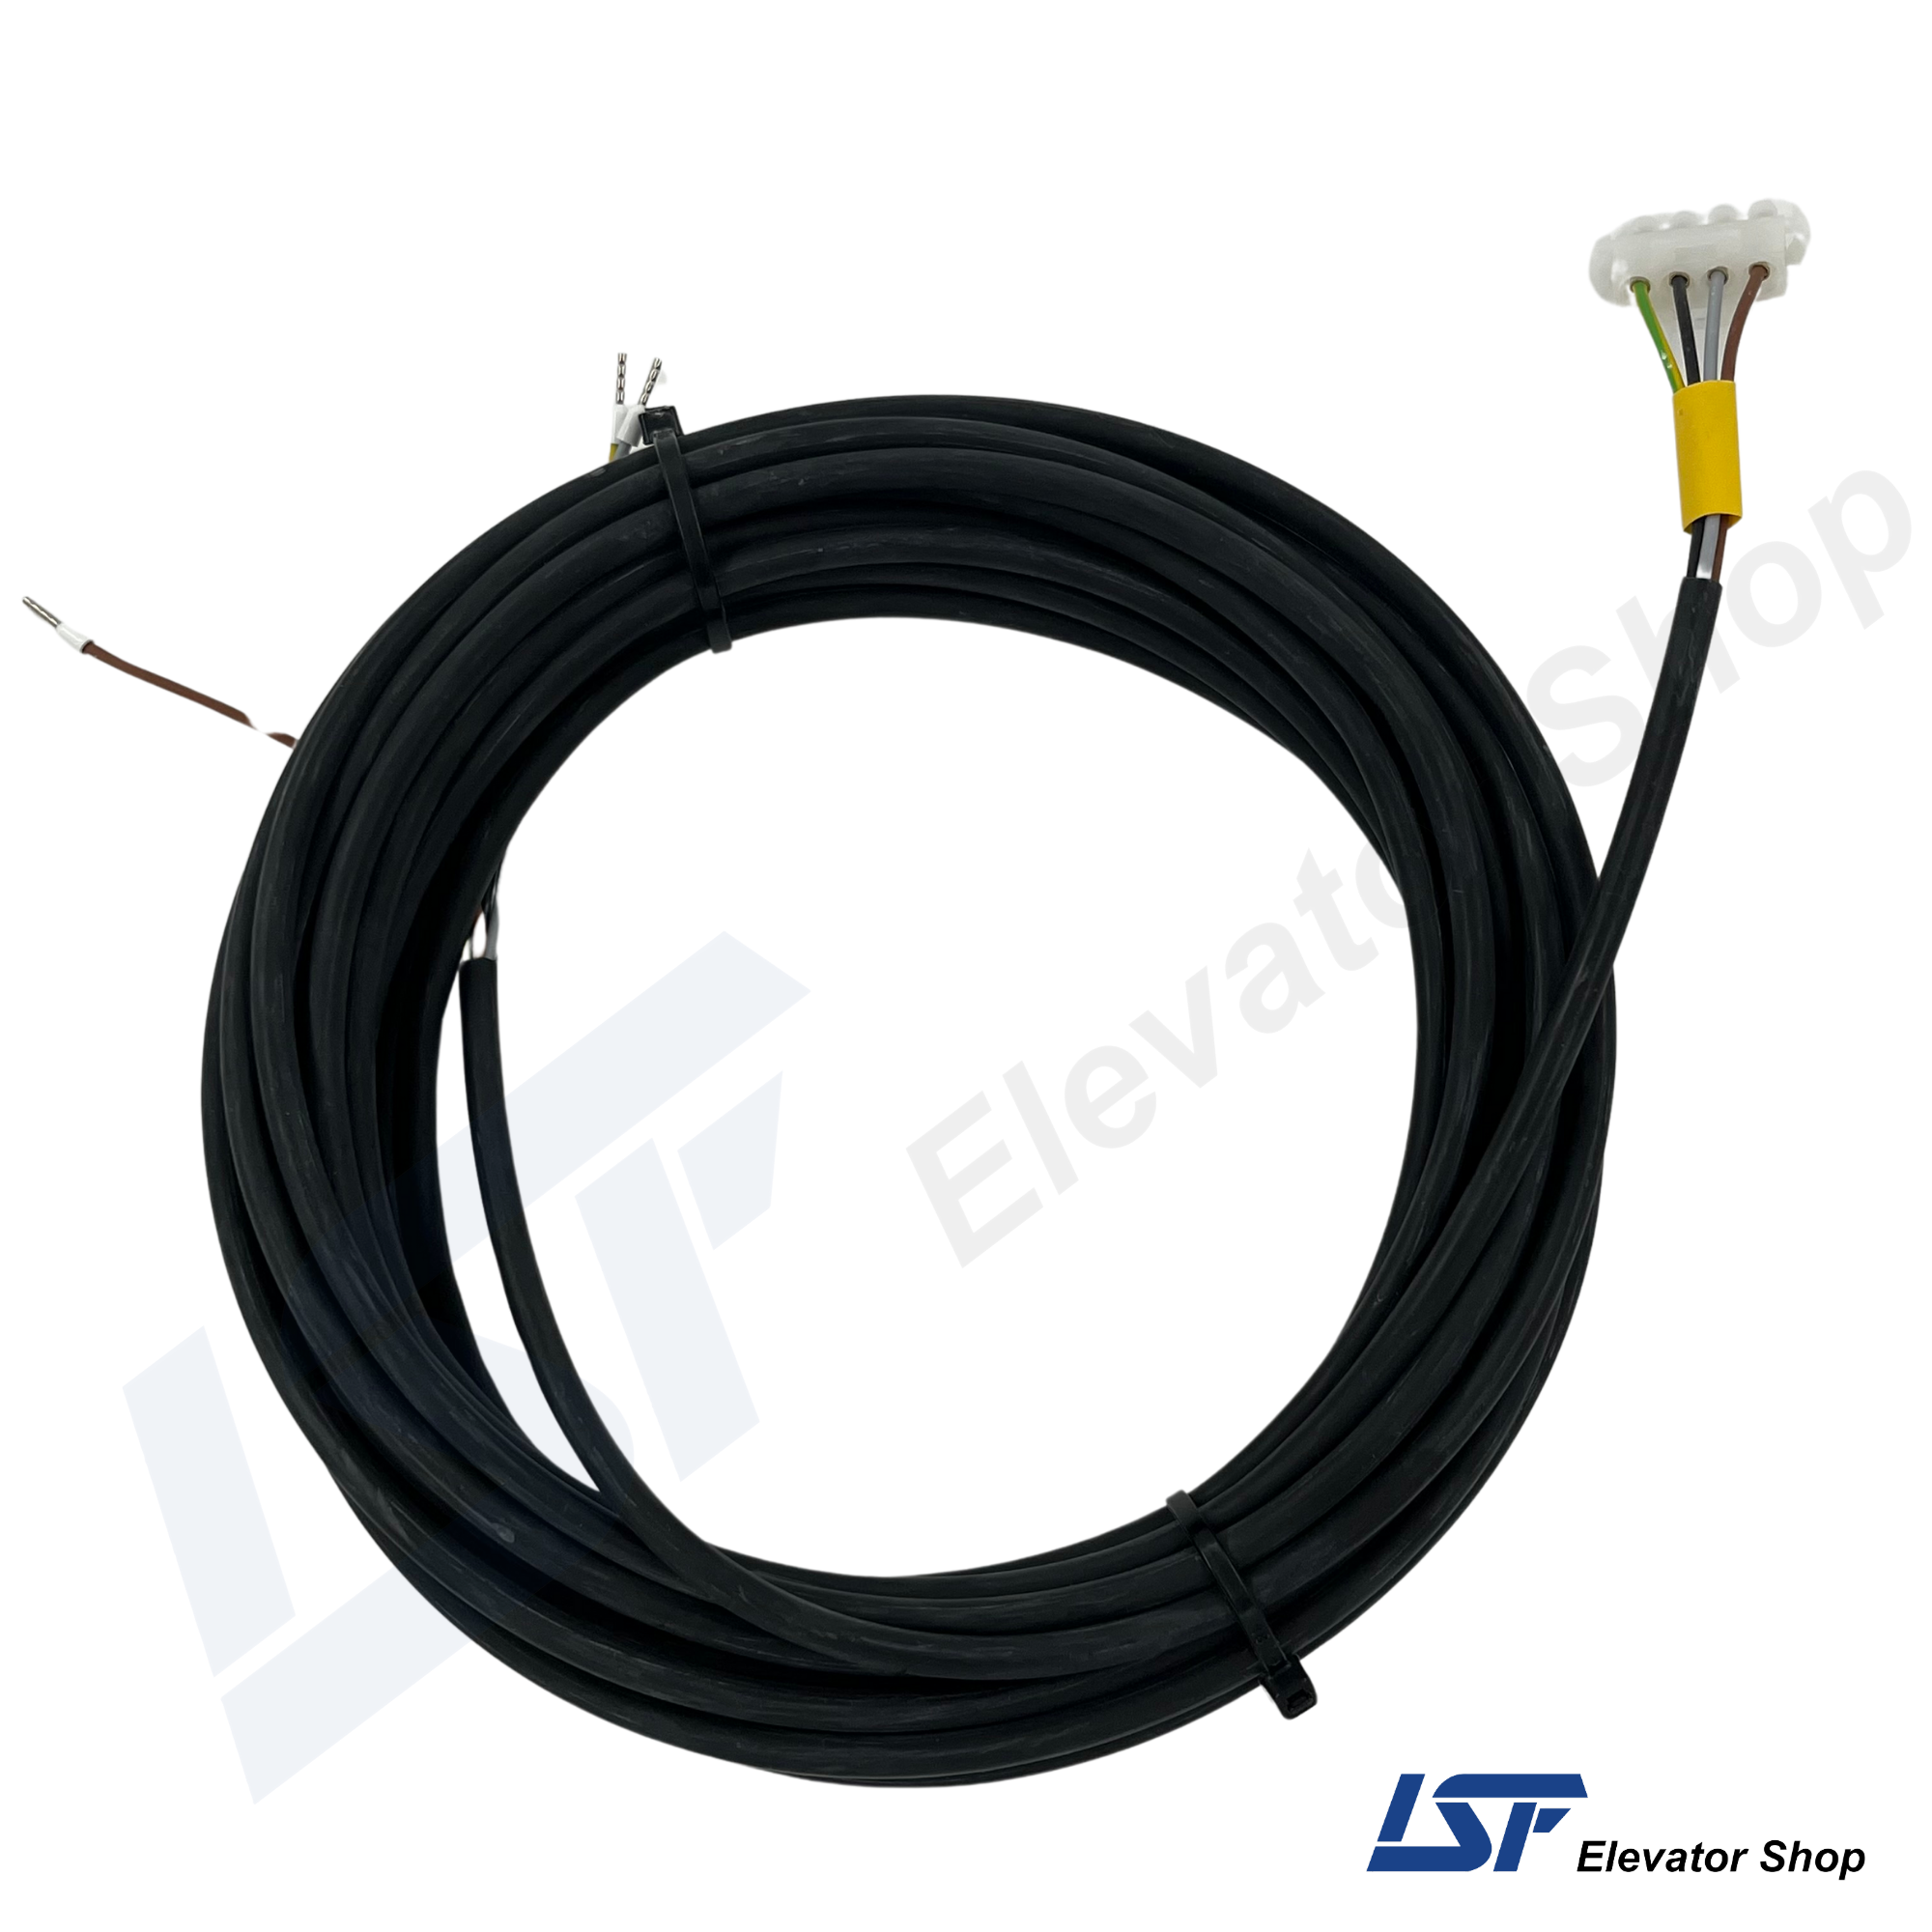 KBL-DCN3 Arkel Door Contacts Cable 10m. for Elevator Systems